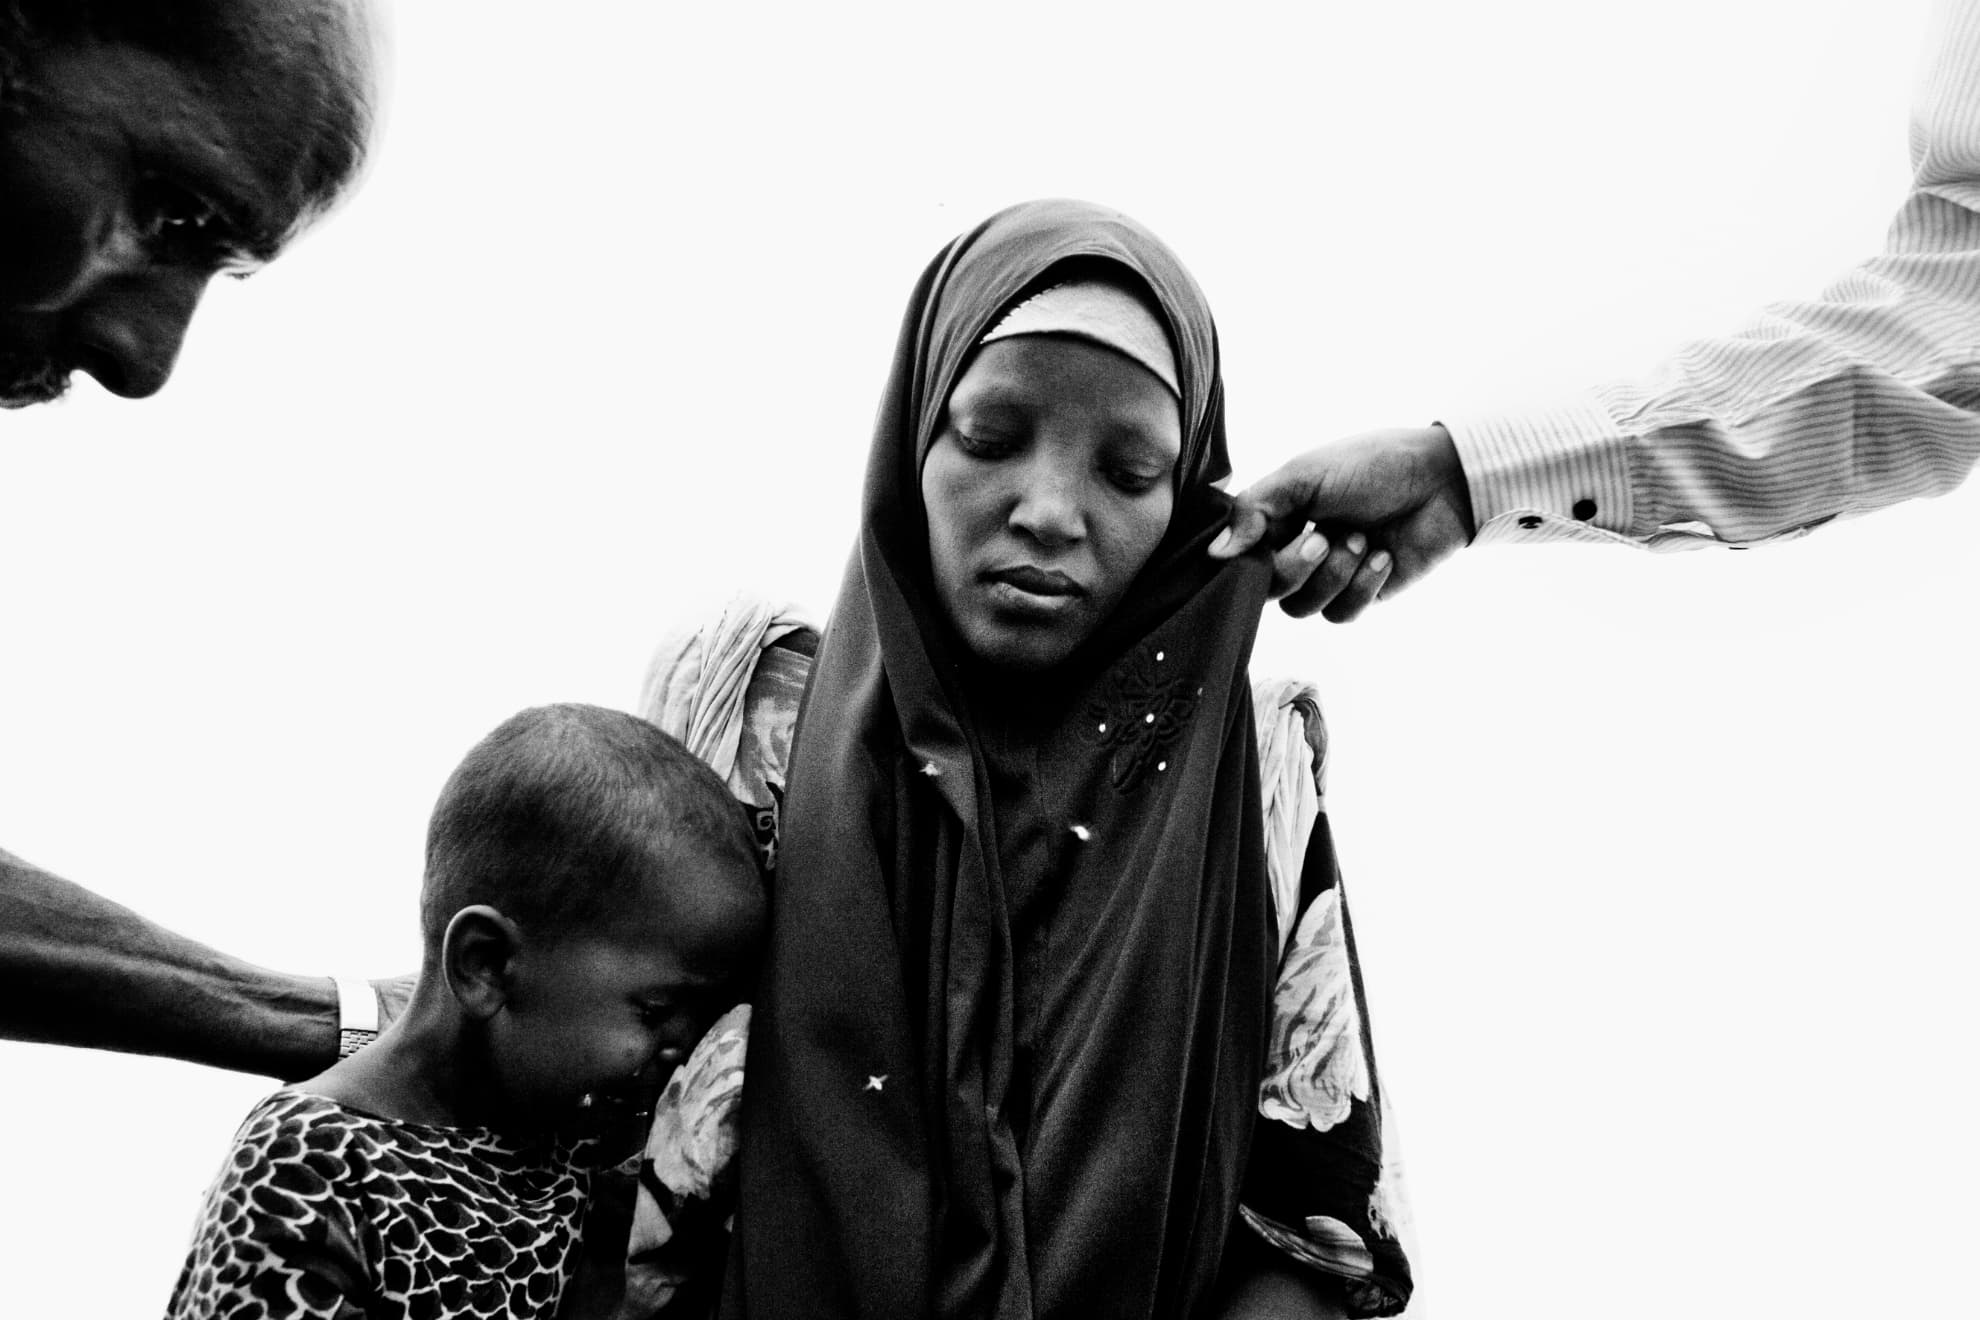 A young woman and her child at the moment of registration in the Dadaab refugee camp in northeastern Kenya.